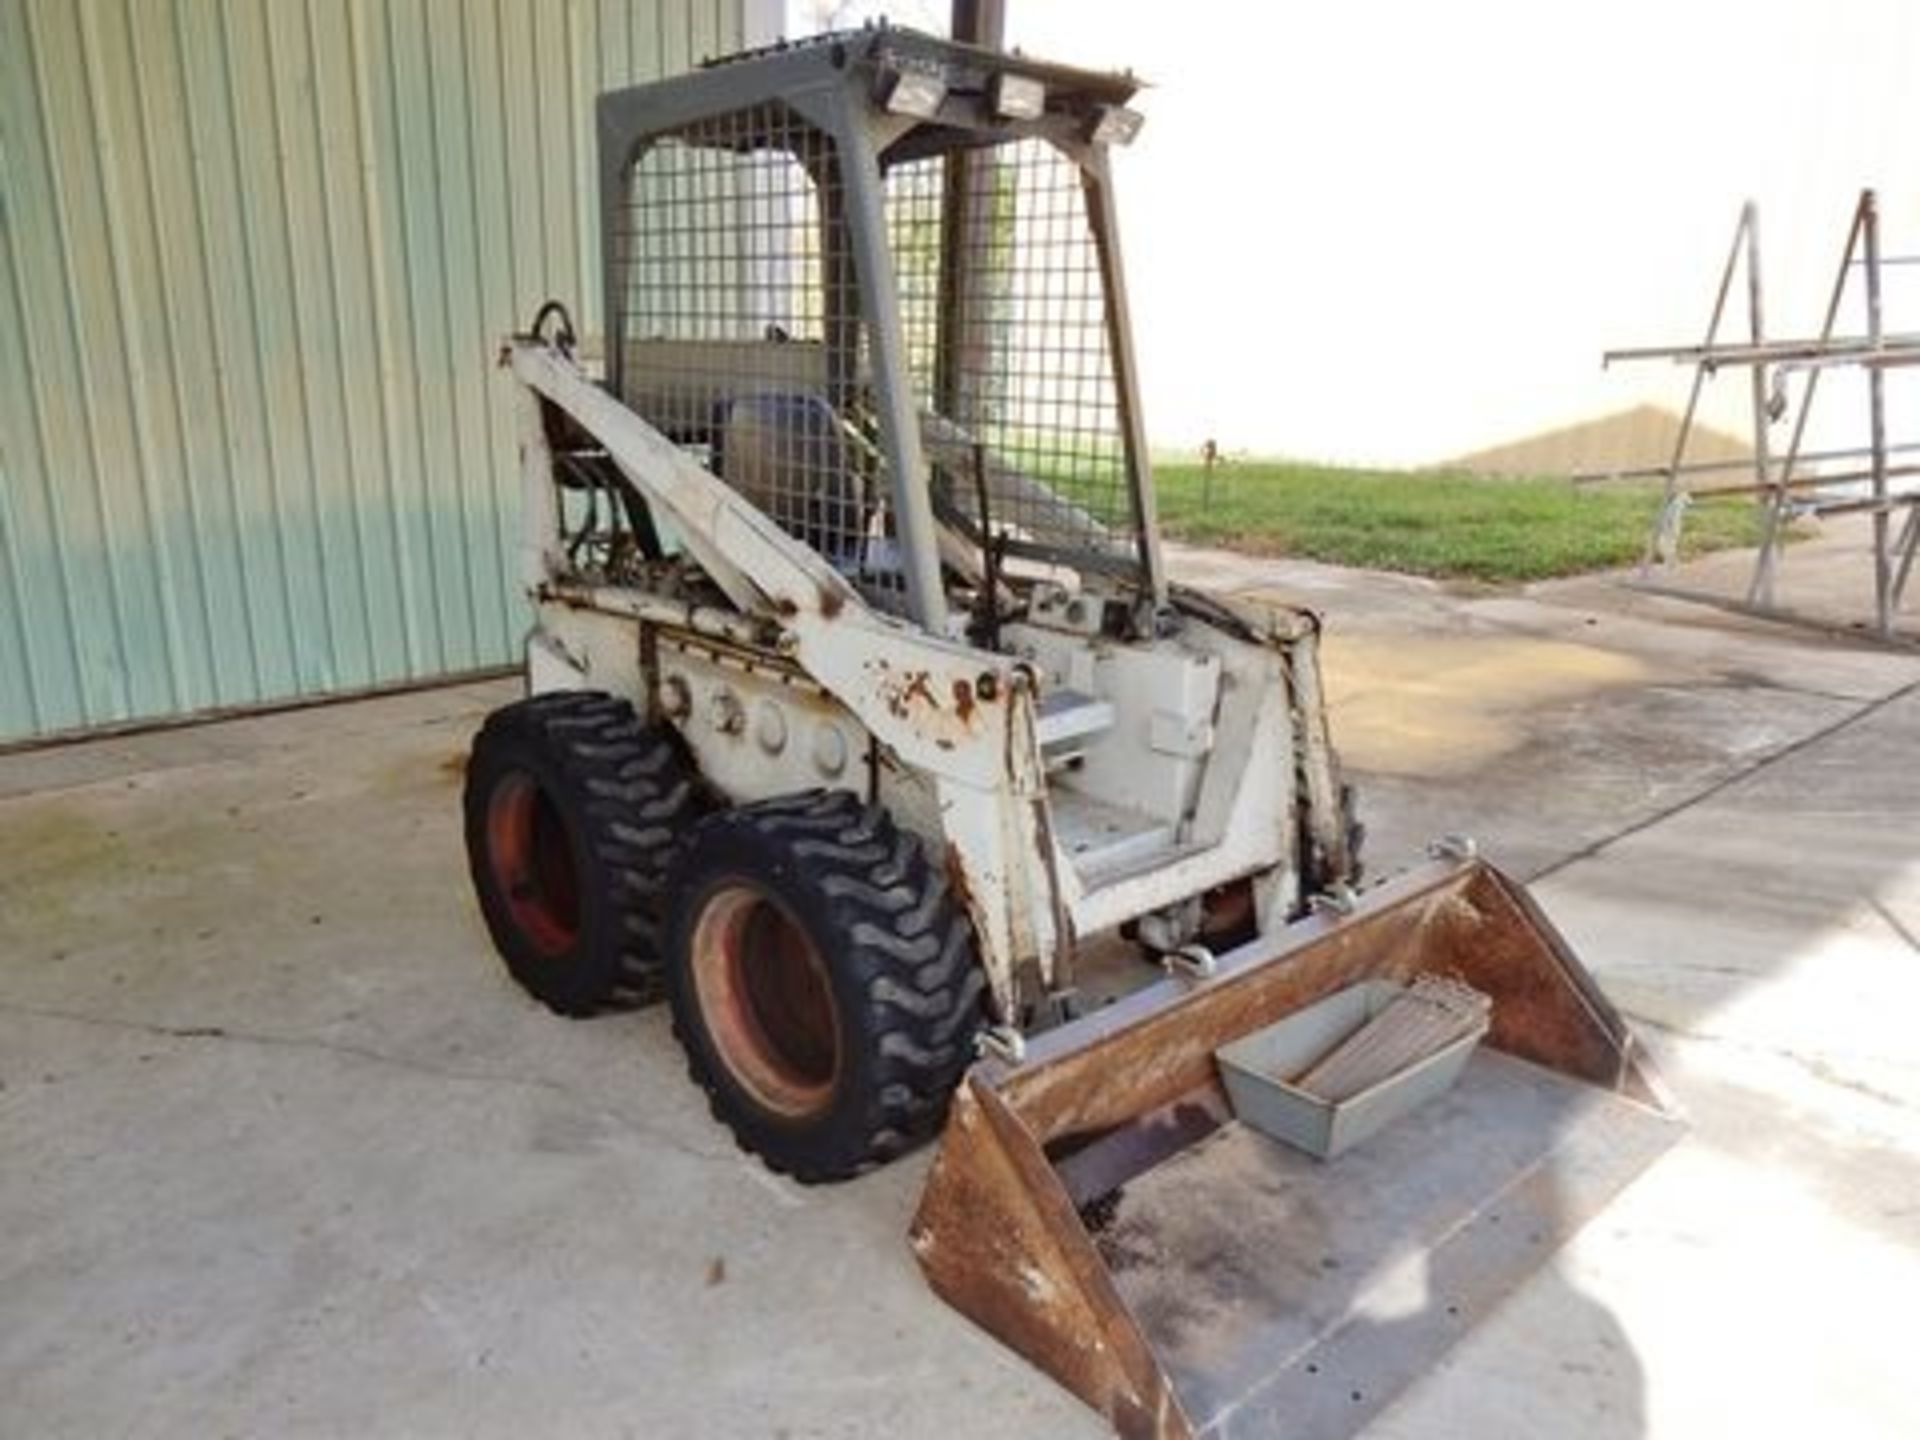 PROCEED OUTSIDE: MELROE/BOBCAT SKID STEER, M# 610, RUBBER TIRES, 60" BUCKET, GAS, OPEN CAB